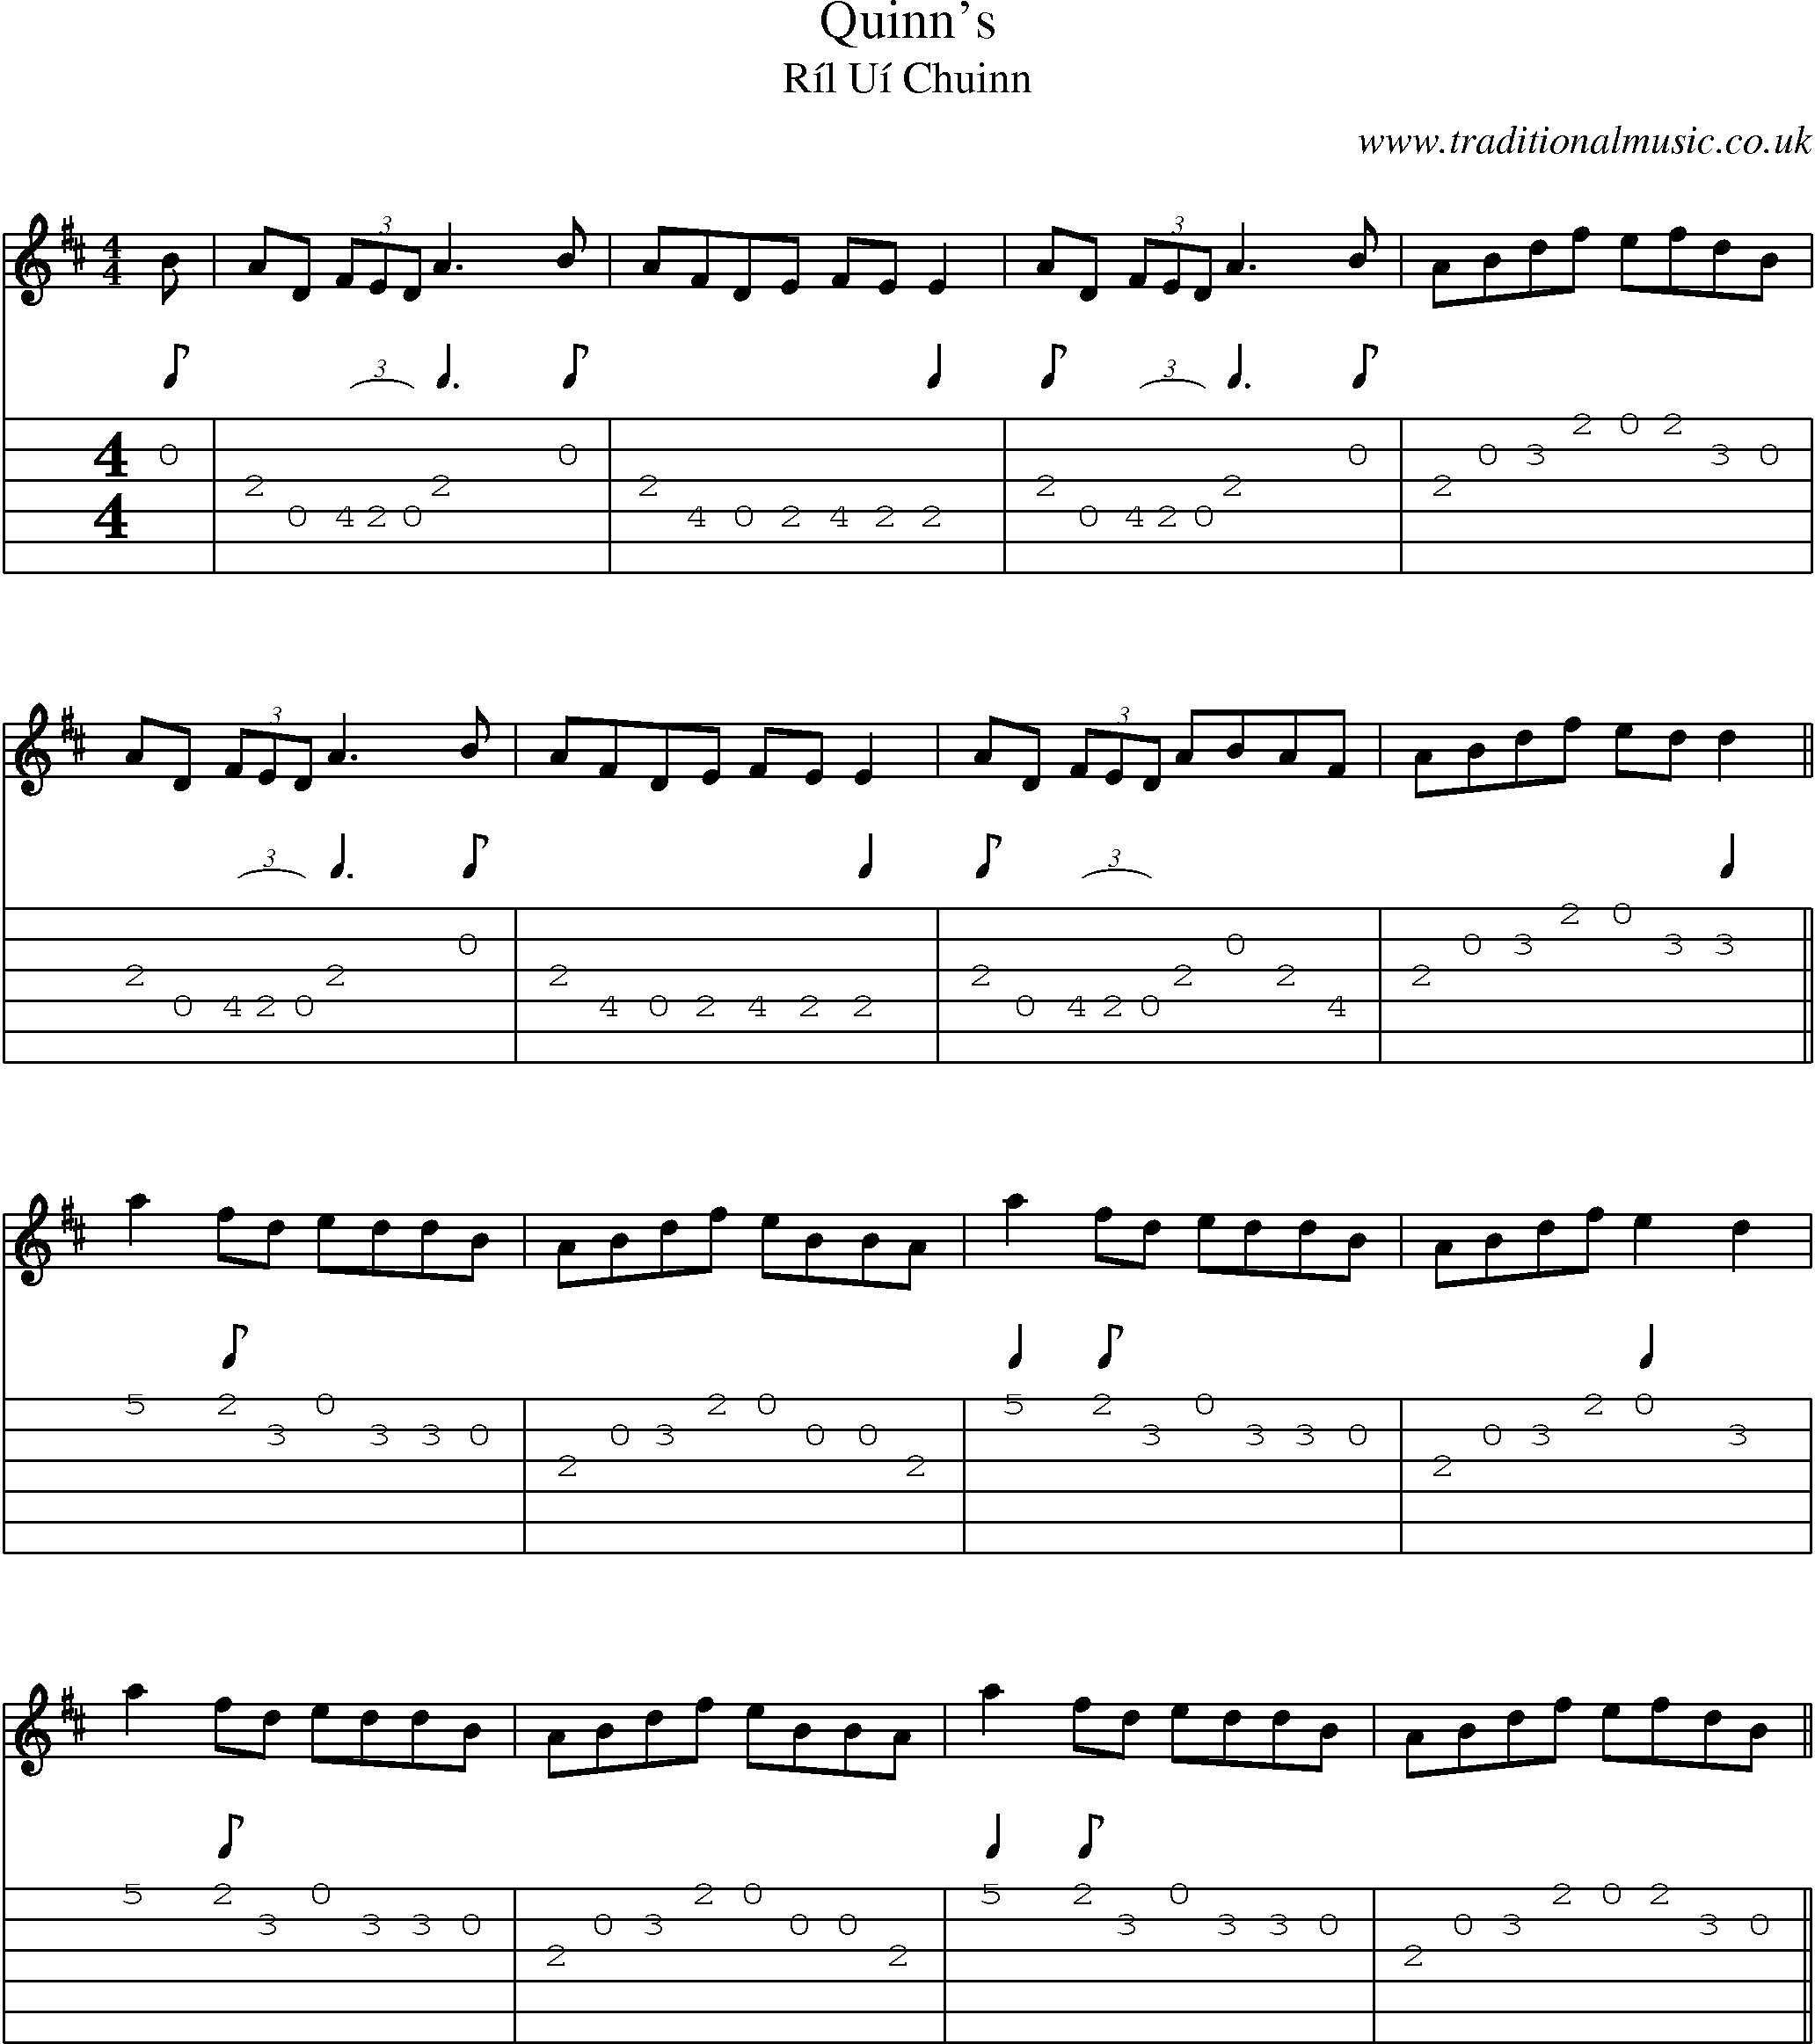 Music Score and Guitar Tabs for Quinns